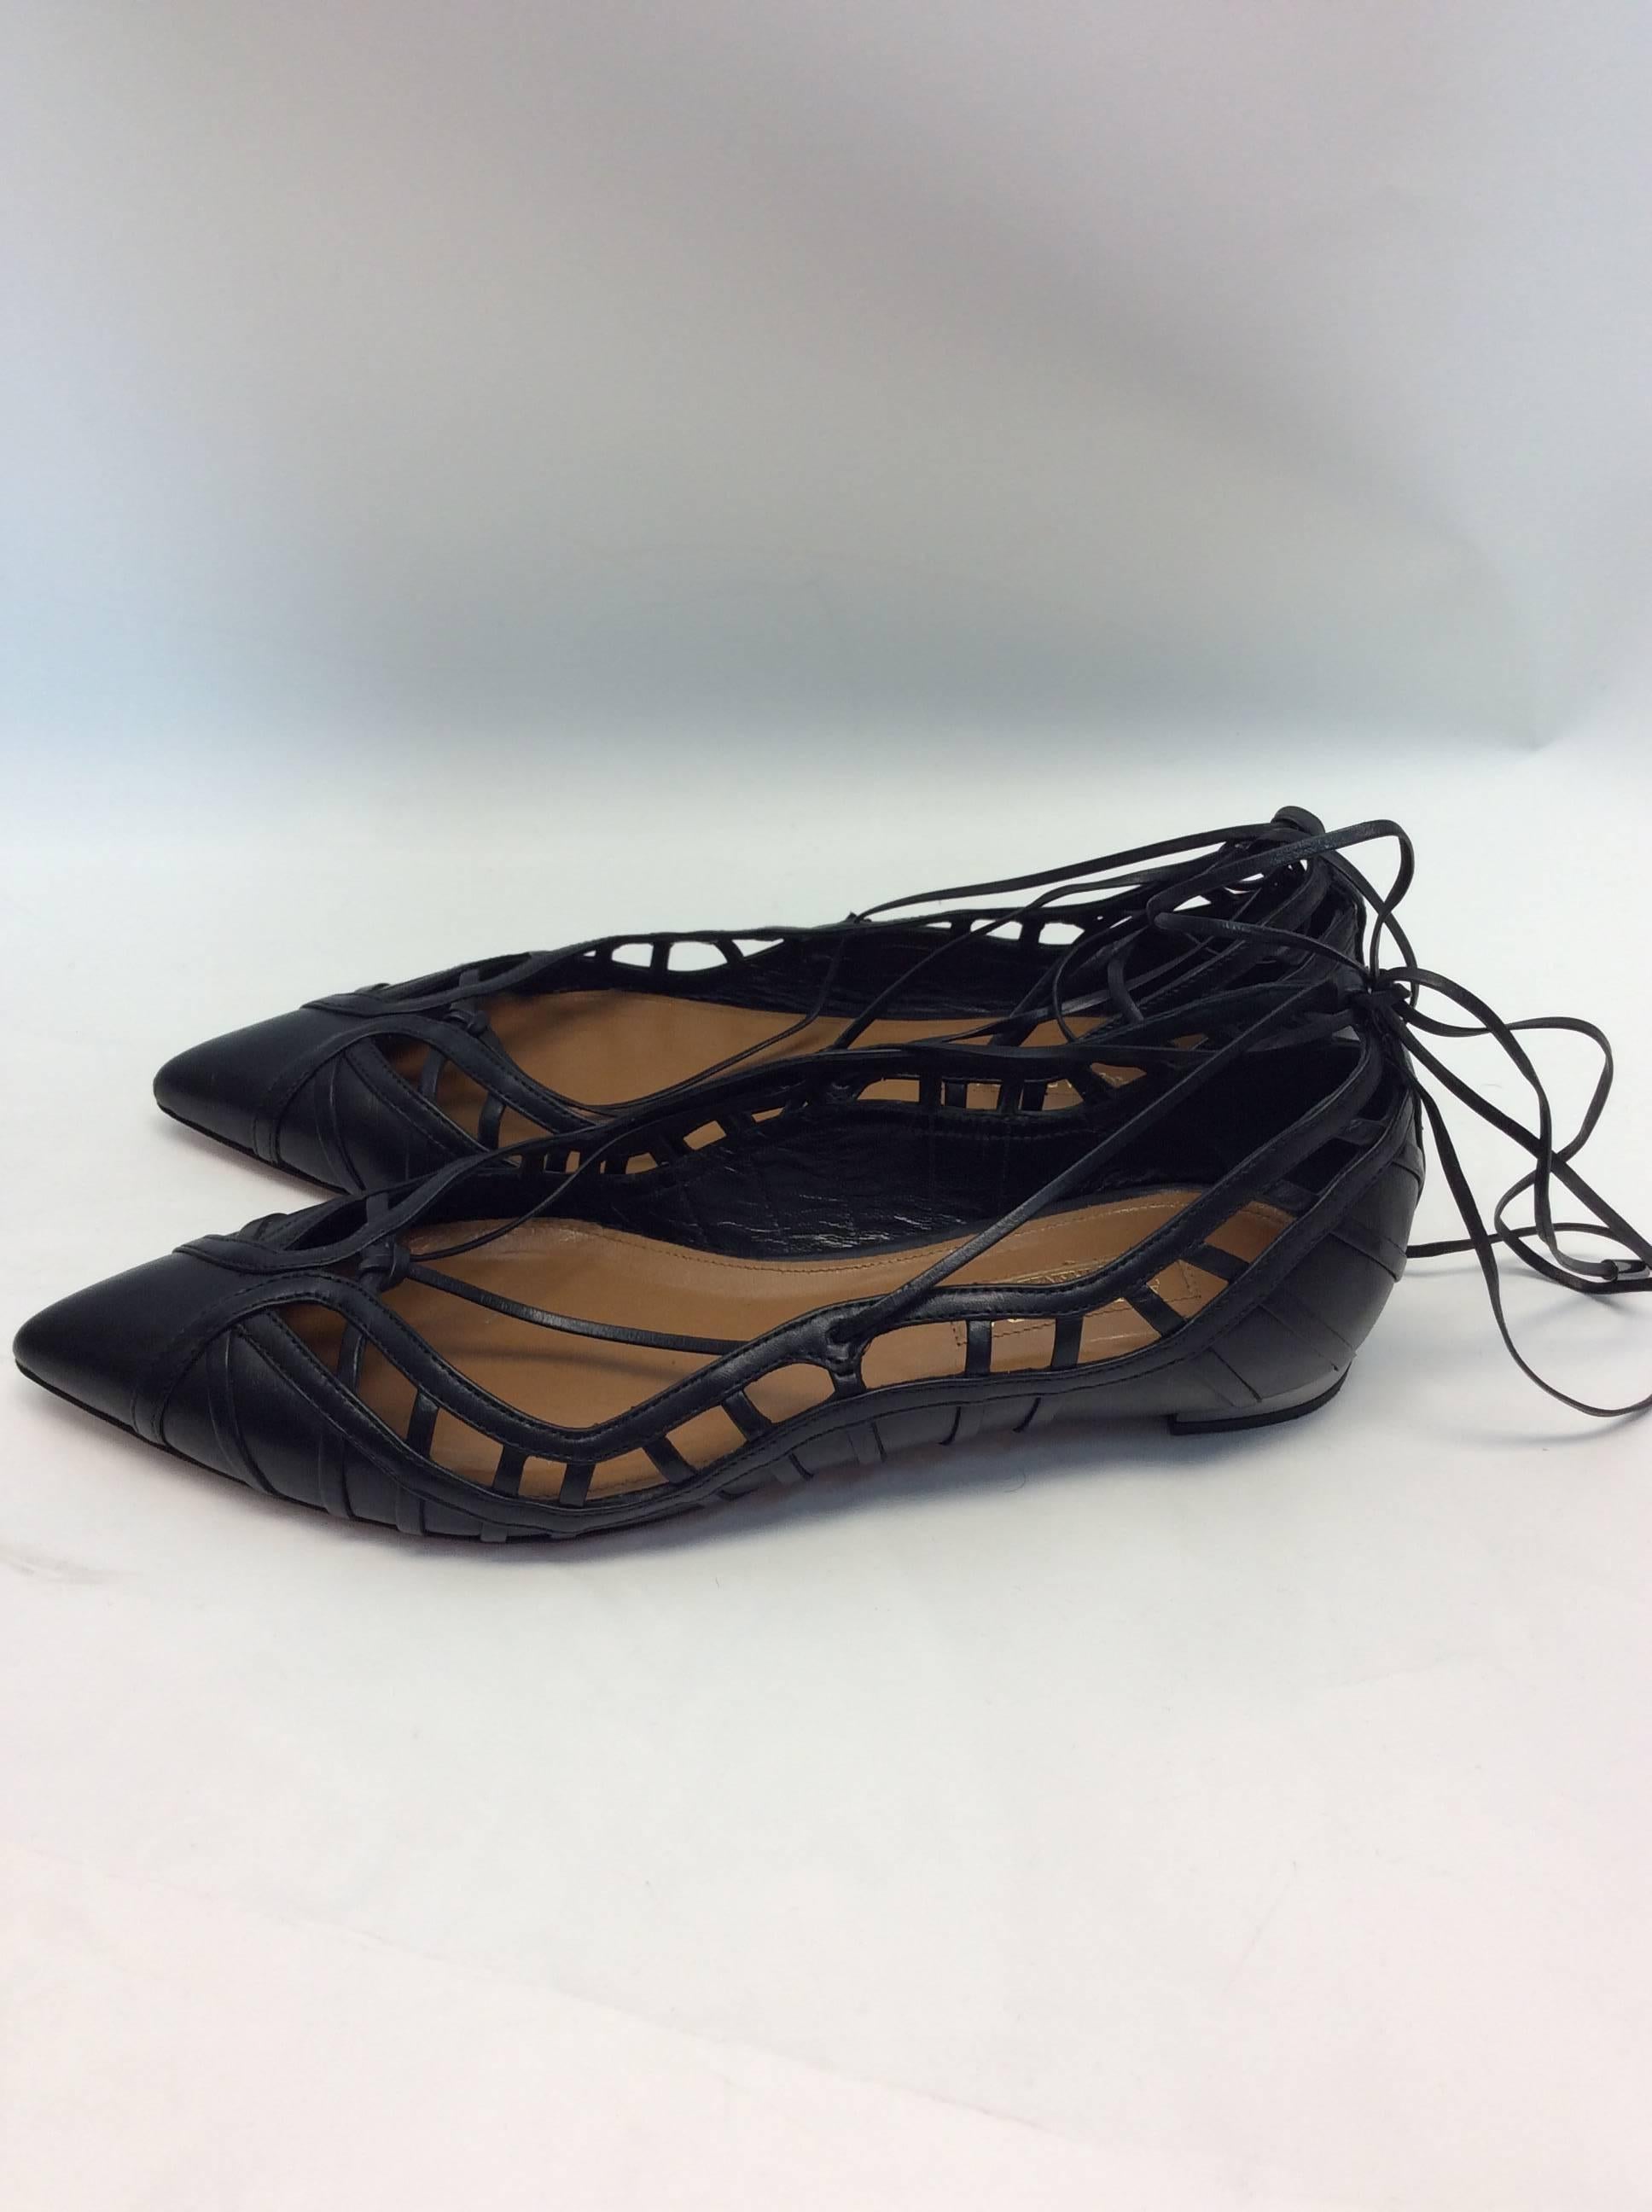 Aquazzura Black Leather Lace Up Flats
$550
Size 36
Black leather cut outs, black leather lace up ankle straps
Made in Italy
